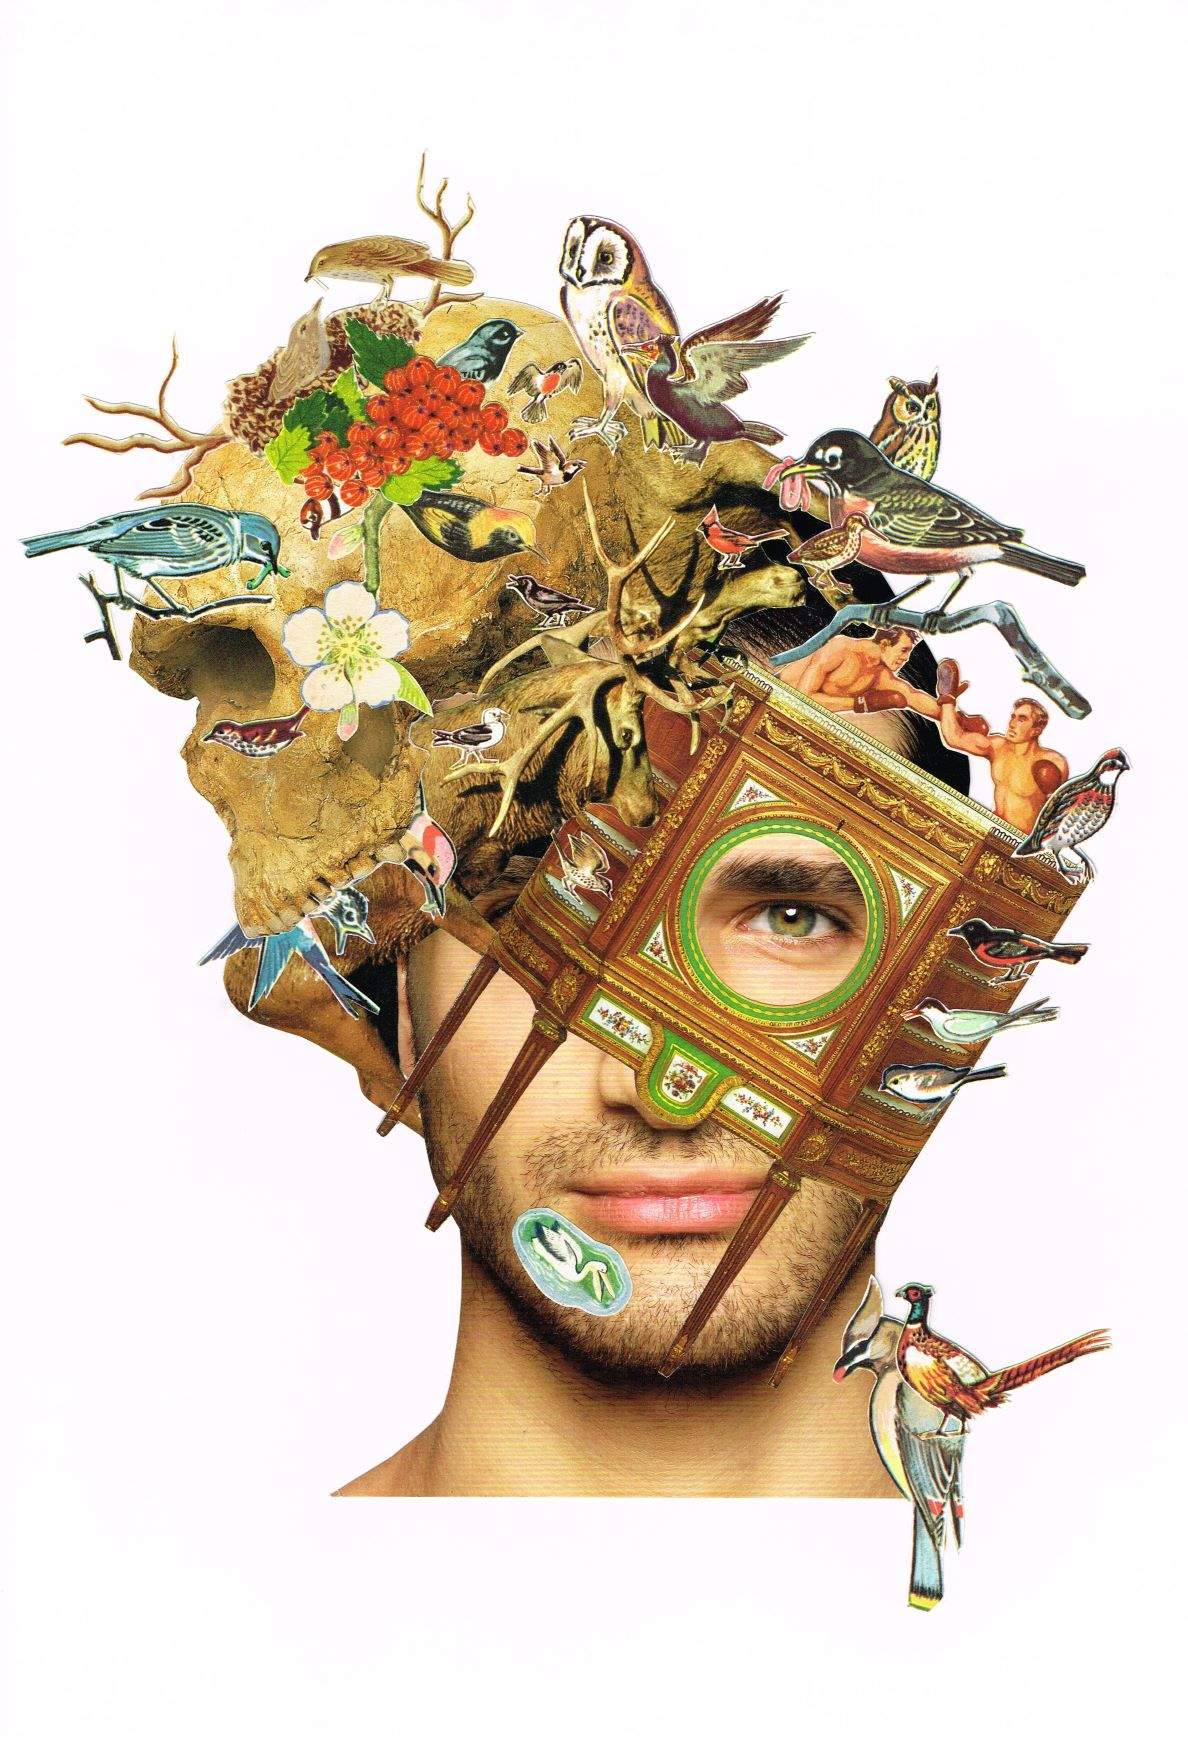 A collage of an eclectic mix of flowers, birds, humans surrounding a man's face